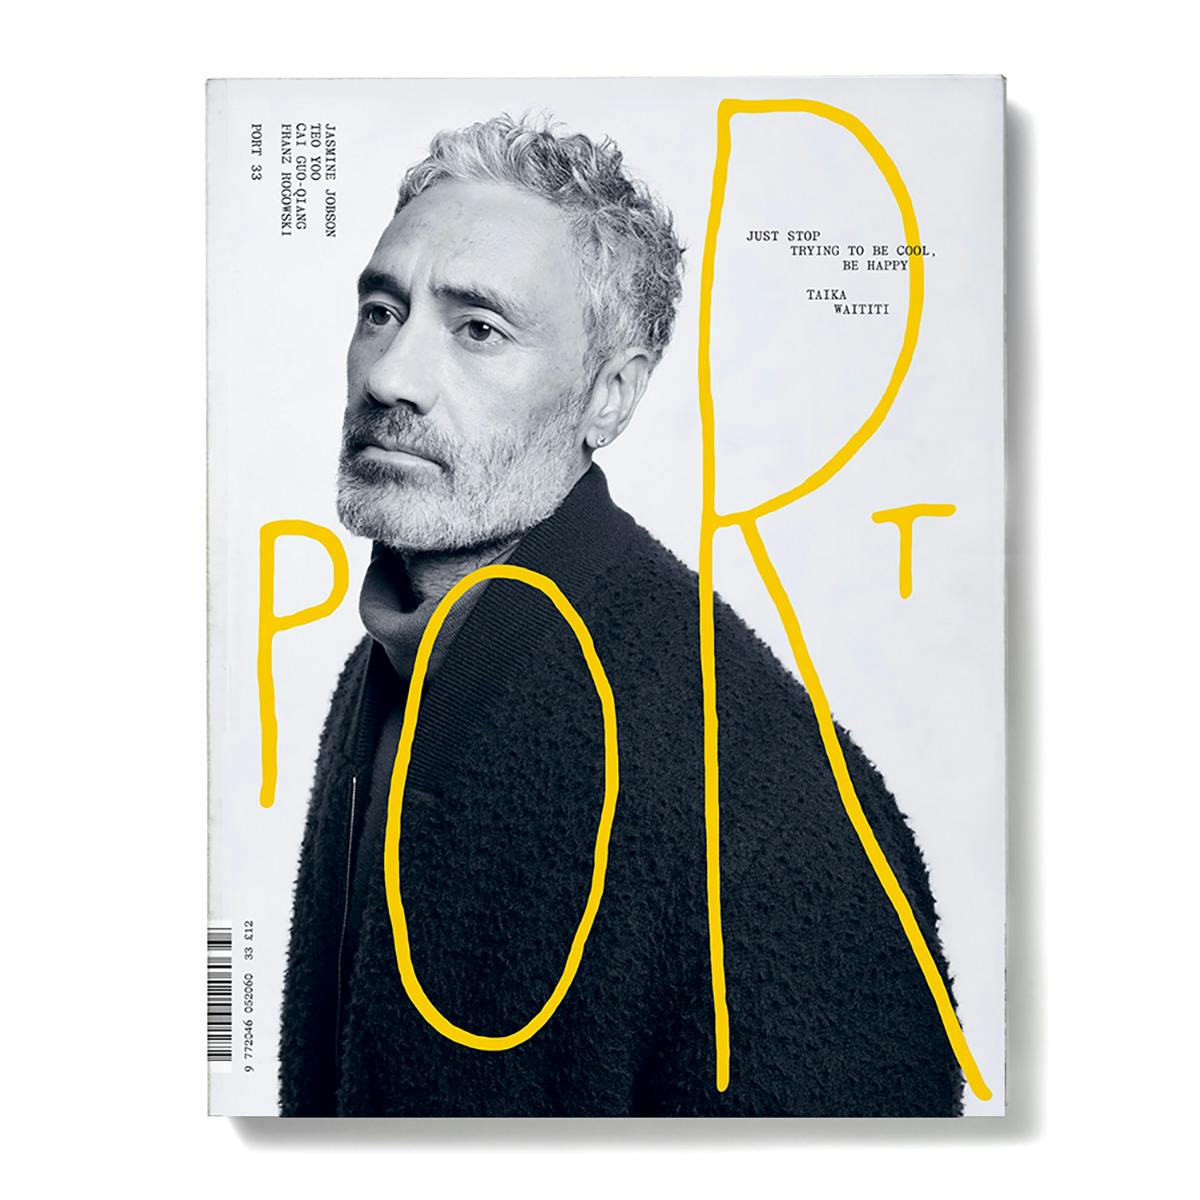 Photo of the cover of Port magazine with the masthead handwritten in unevenly sized yellow letters over the top of a black and white portrait photo of Taiki Waititi